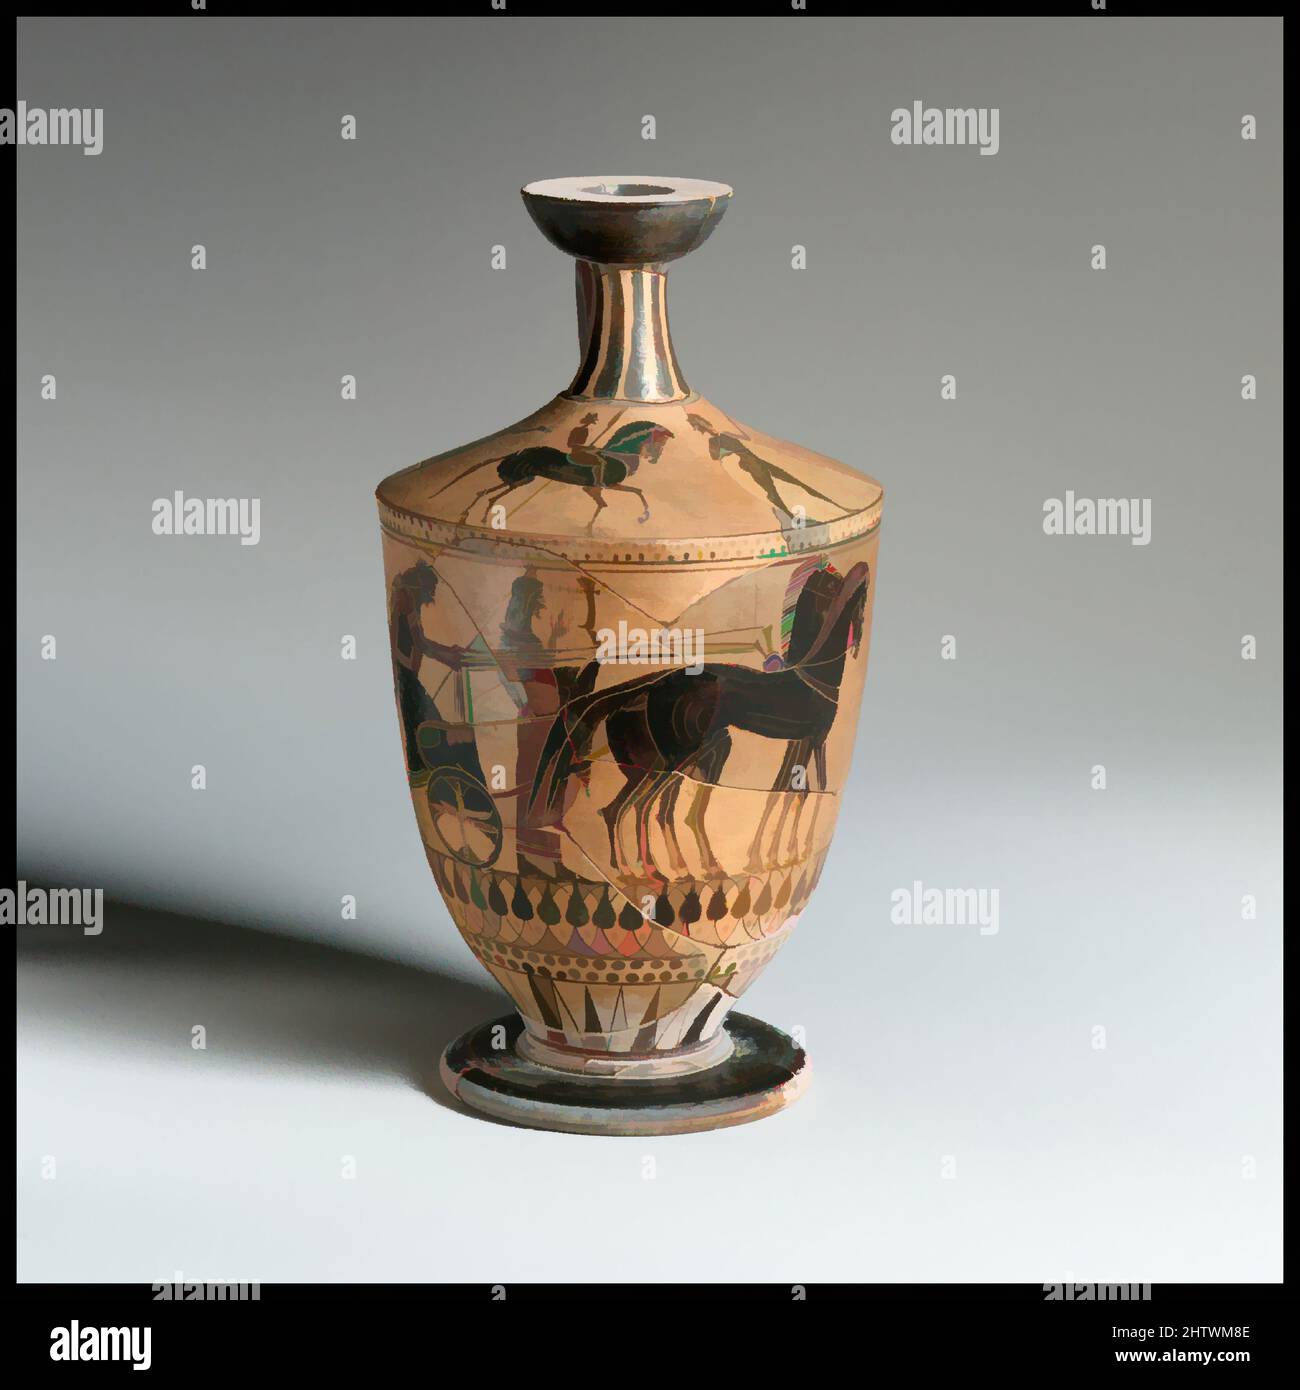 Art inspired by Terracotta lekythos (oil flask), Archaic, ca. 520 B.C., Greek, Attic, Terracotta; black-figure, H. 6 1/8 in. (15.5 cm), Vases, On the body, goddess mounting chariot, On the shoulder, horseman and athletes approaching seated man. The grayish color of the clay indicates, Classic works modernized by Artotop with a splash of modernity. Shapes, color and value, eye-catching visual impact on art. Emotions through freedom of artworks in a contemporary way. A timeless message pursuing a wildly creative new direction. Artists turning to the digital medium and creating the Artotop NFT Stock Photo